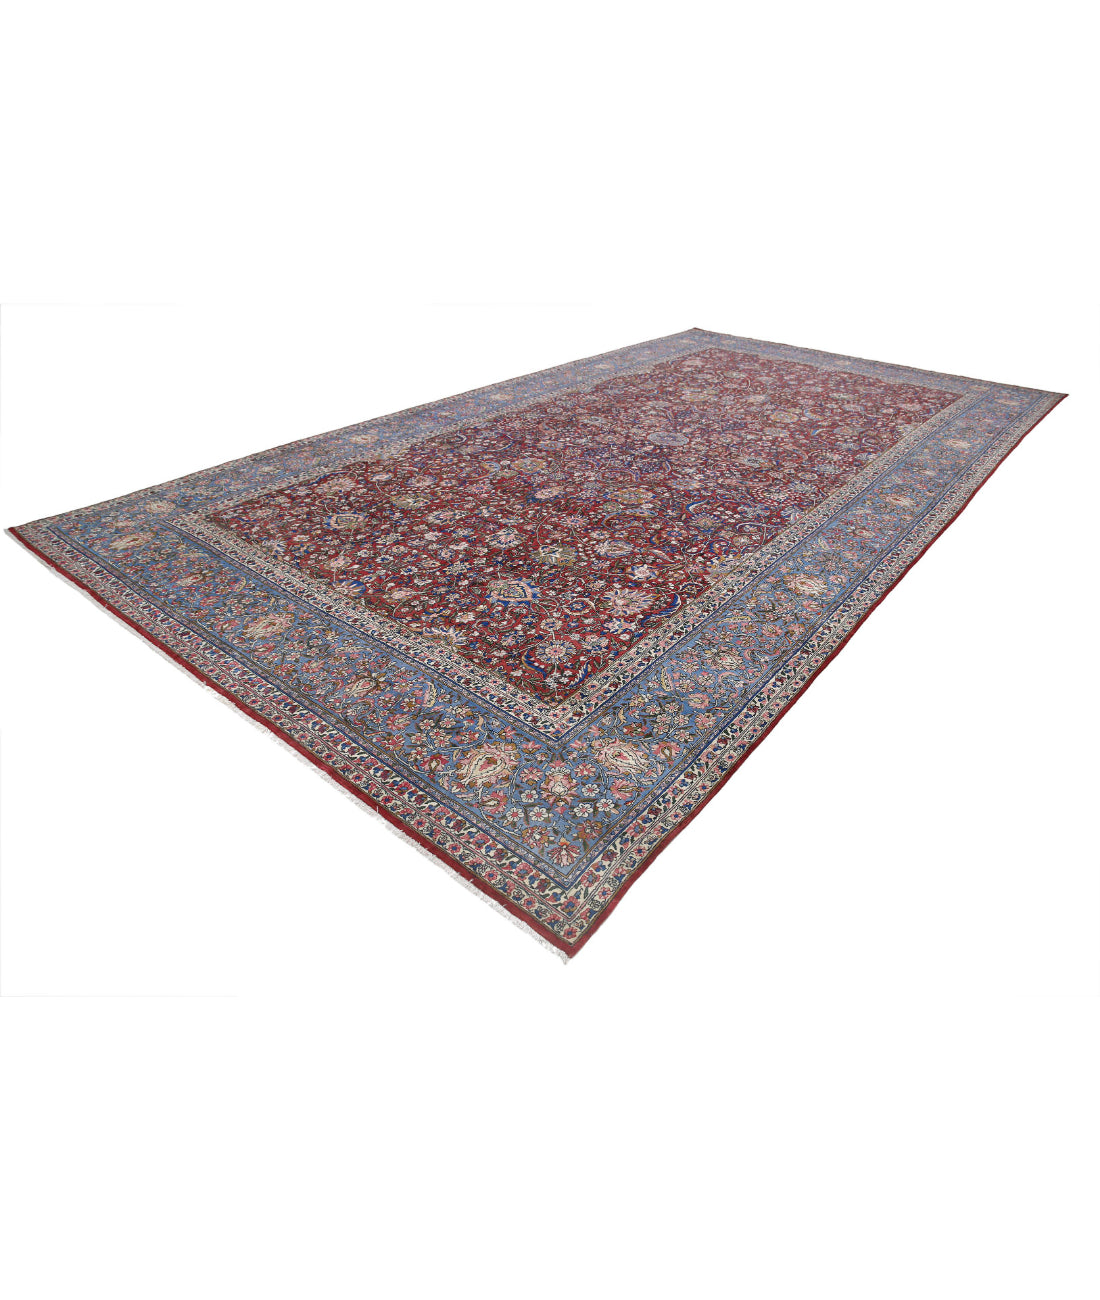 Hand Knotted Antique Masterpiece Persian Kerman Fine Wool Rug - 10'8'' x 20'2'' 10'8'' x 20'2'' (320 X 605) / Burgundy / Blue